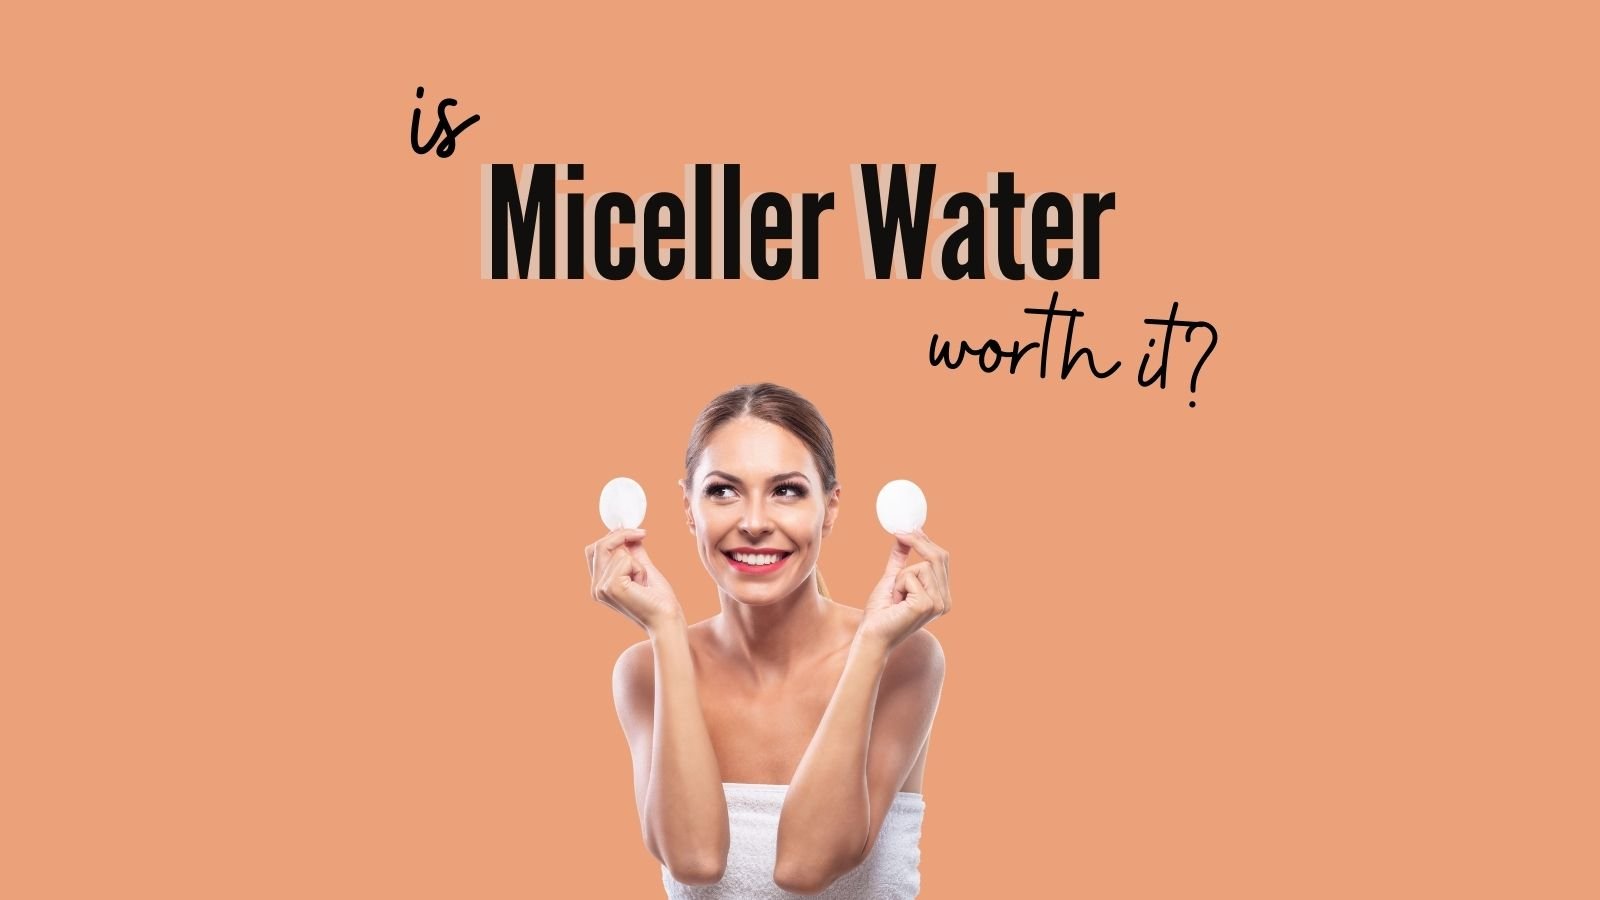 Miceller Water - Make it yourself! - The SkinScience Company